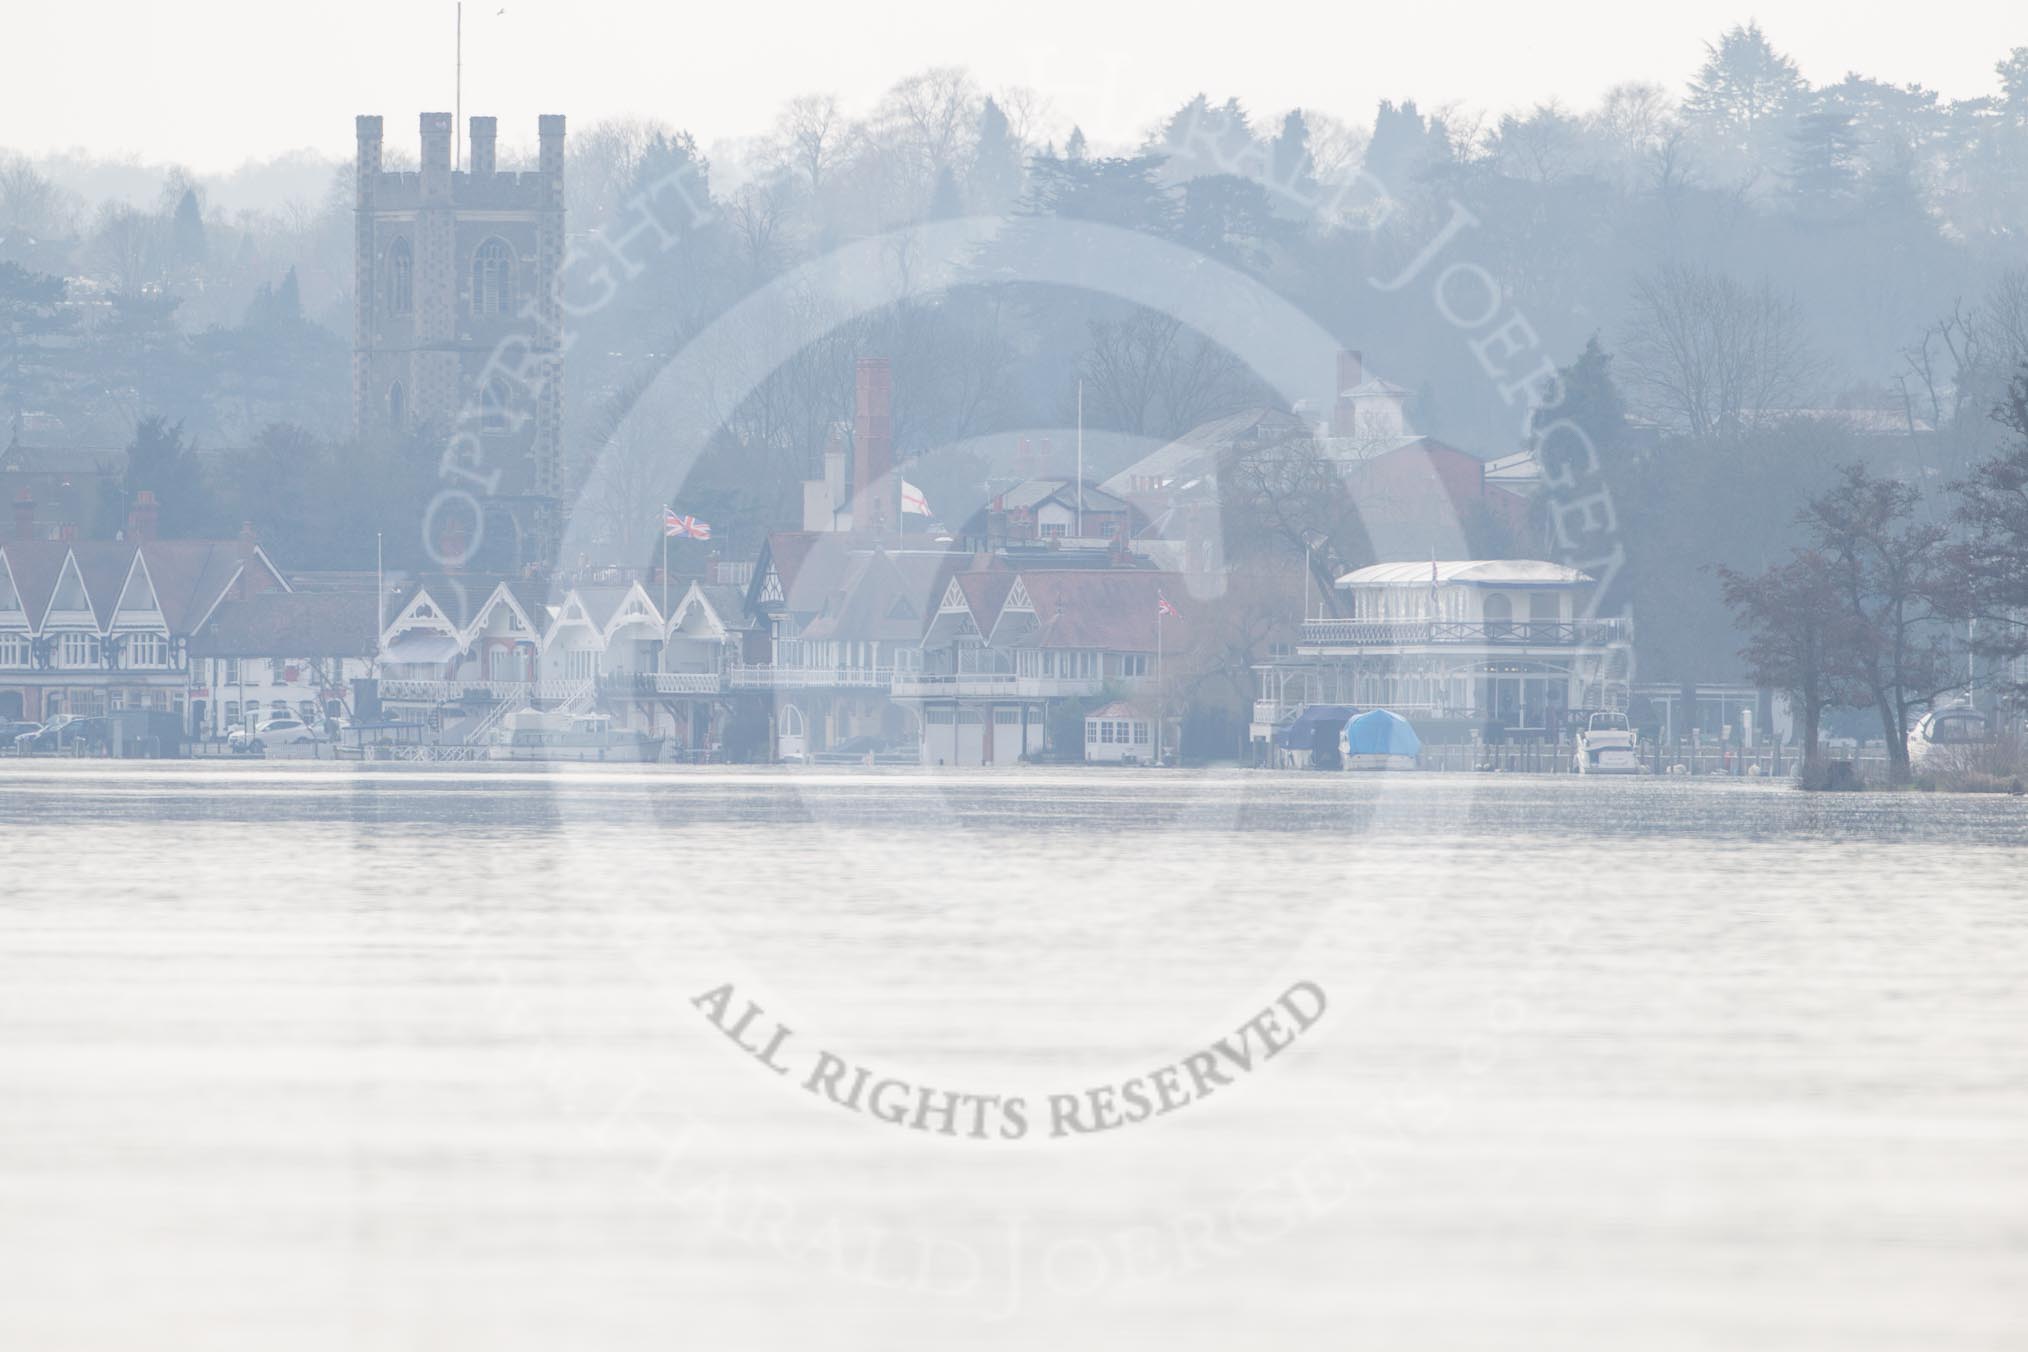 The Boat Race season 2013 - CUWBC training: Henley-on-Thames seen from Remenham on a cold and cloudy day,.
River Thames near Remenham,
Henley-on-Thames,
Oxfordshire,
United Kingdom,
on 19 March 2013 at 13:20, image #5